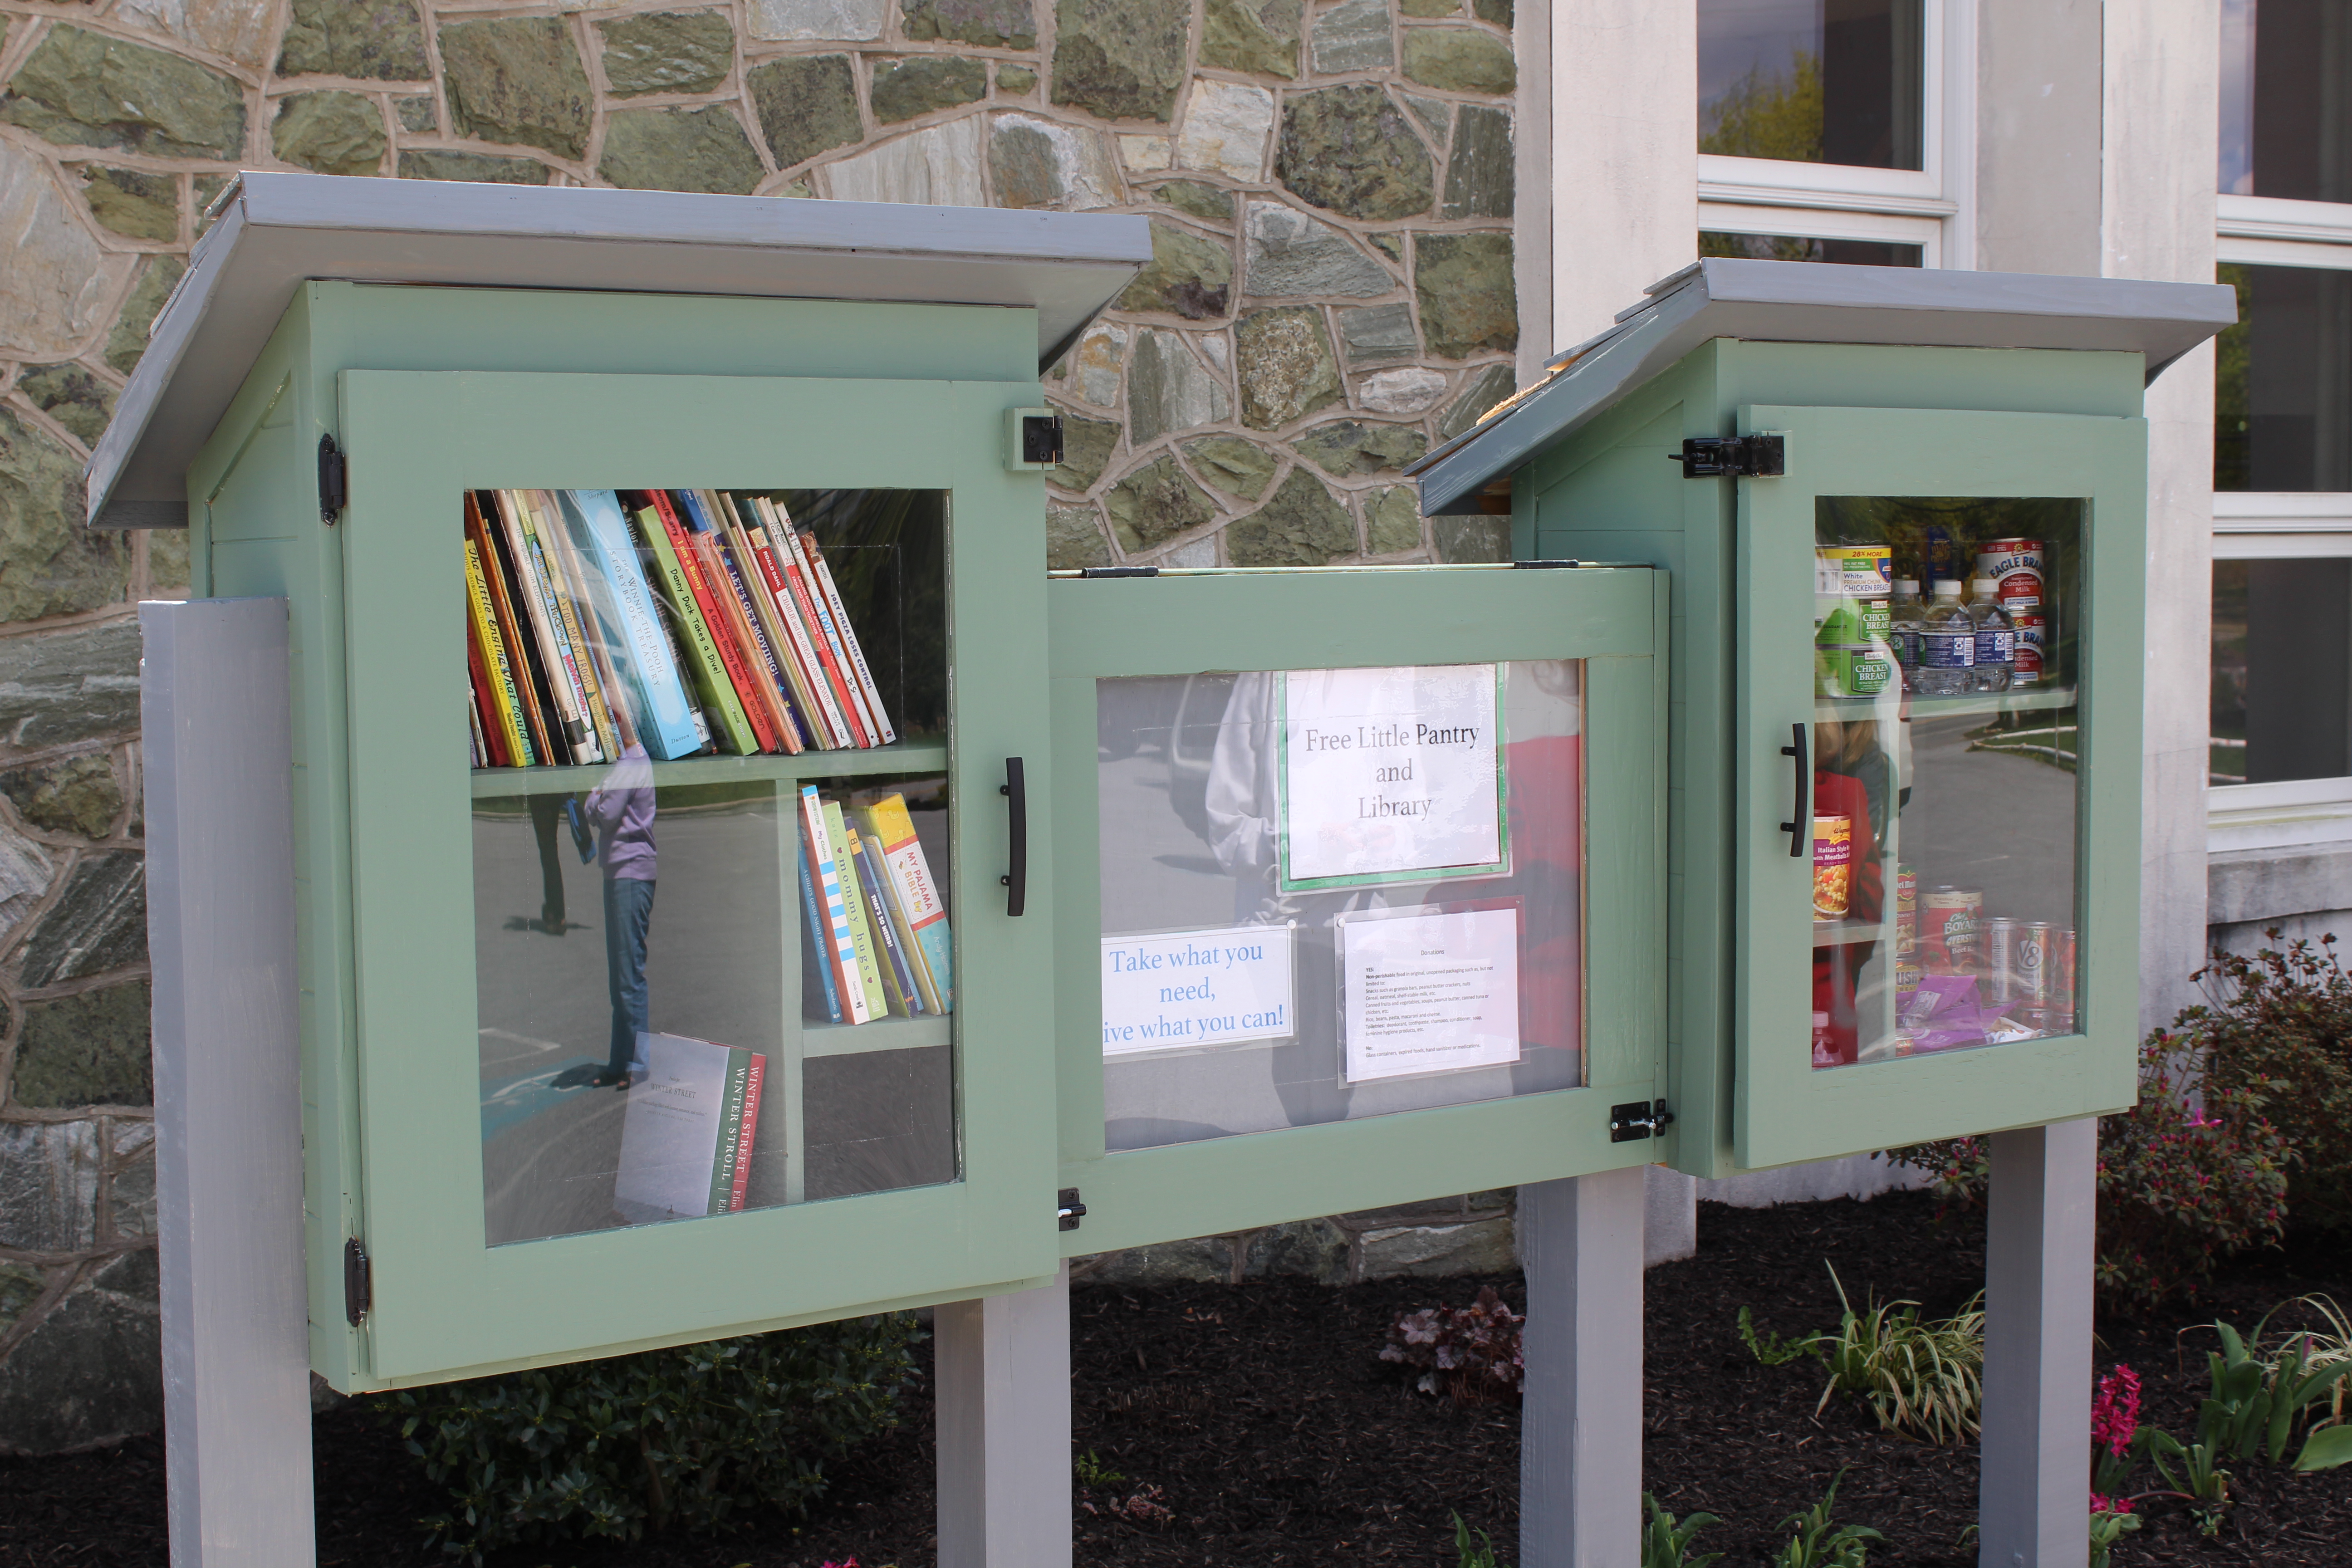 Free Little Pantry and Library Photo 1